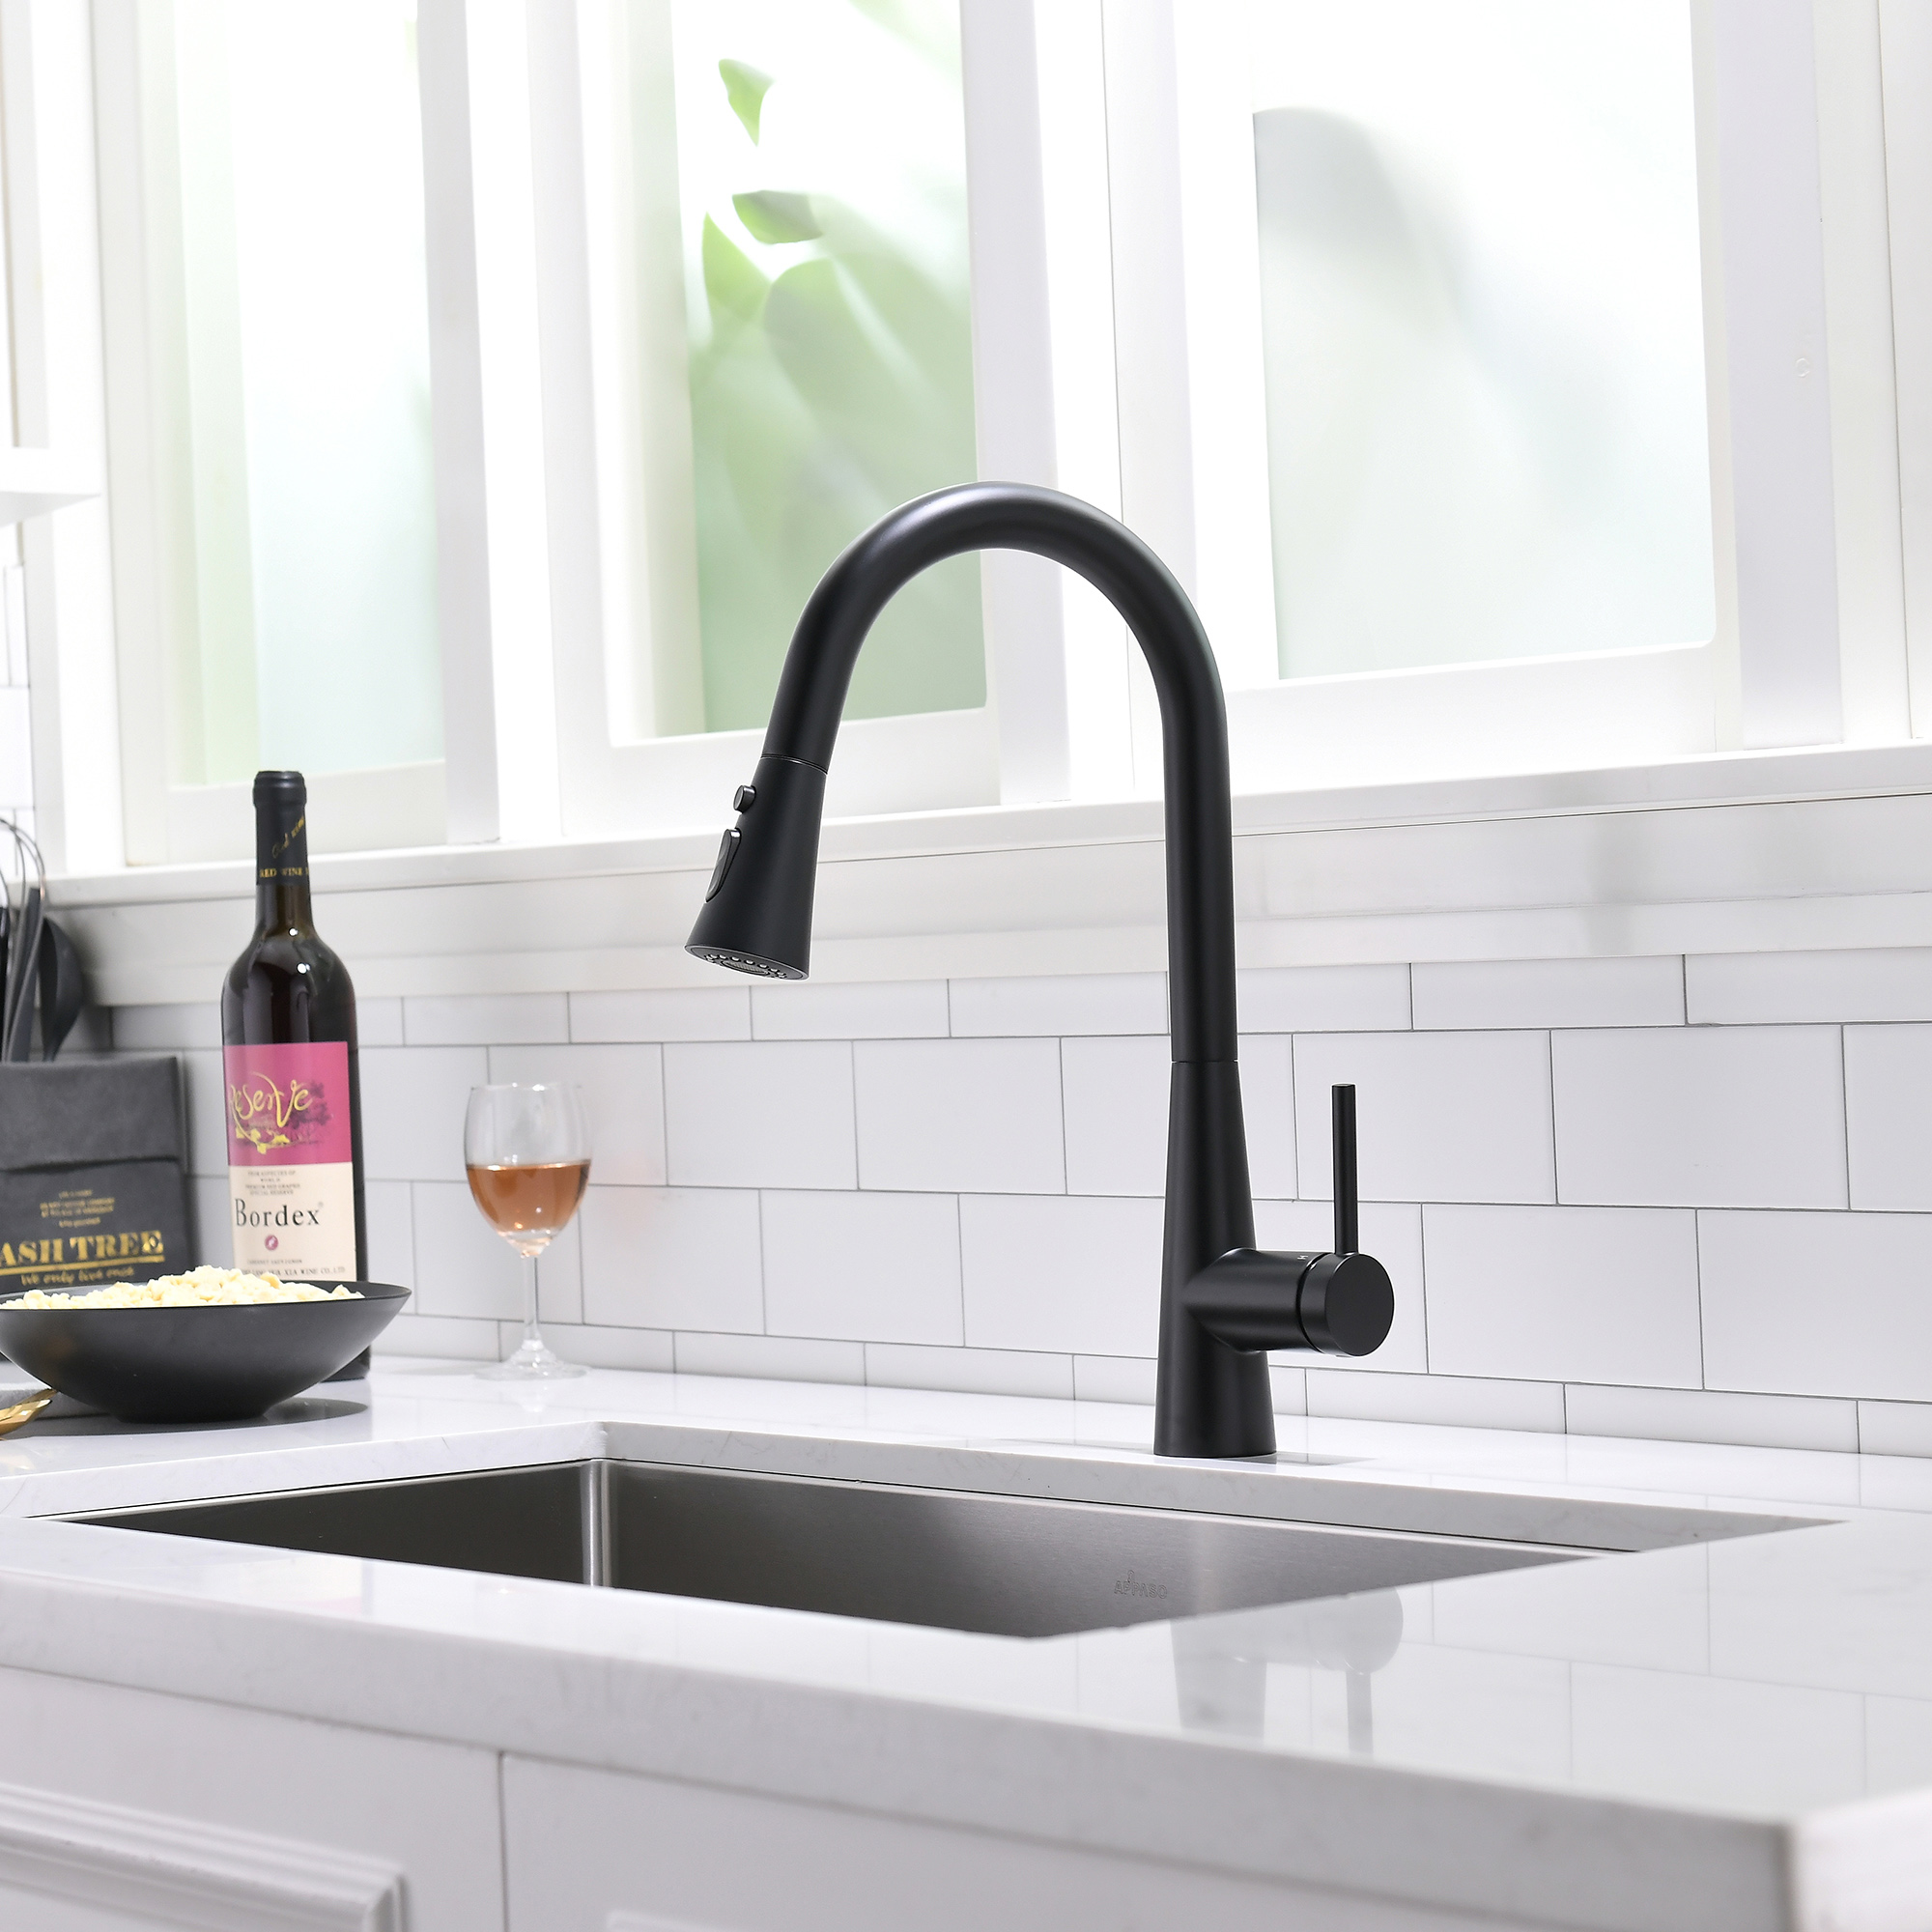 Pull Down Sprayer Swan Neck Kitchen Faucet in Black Stainless Steel